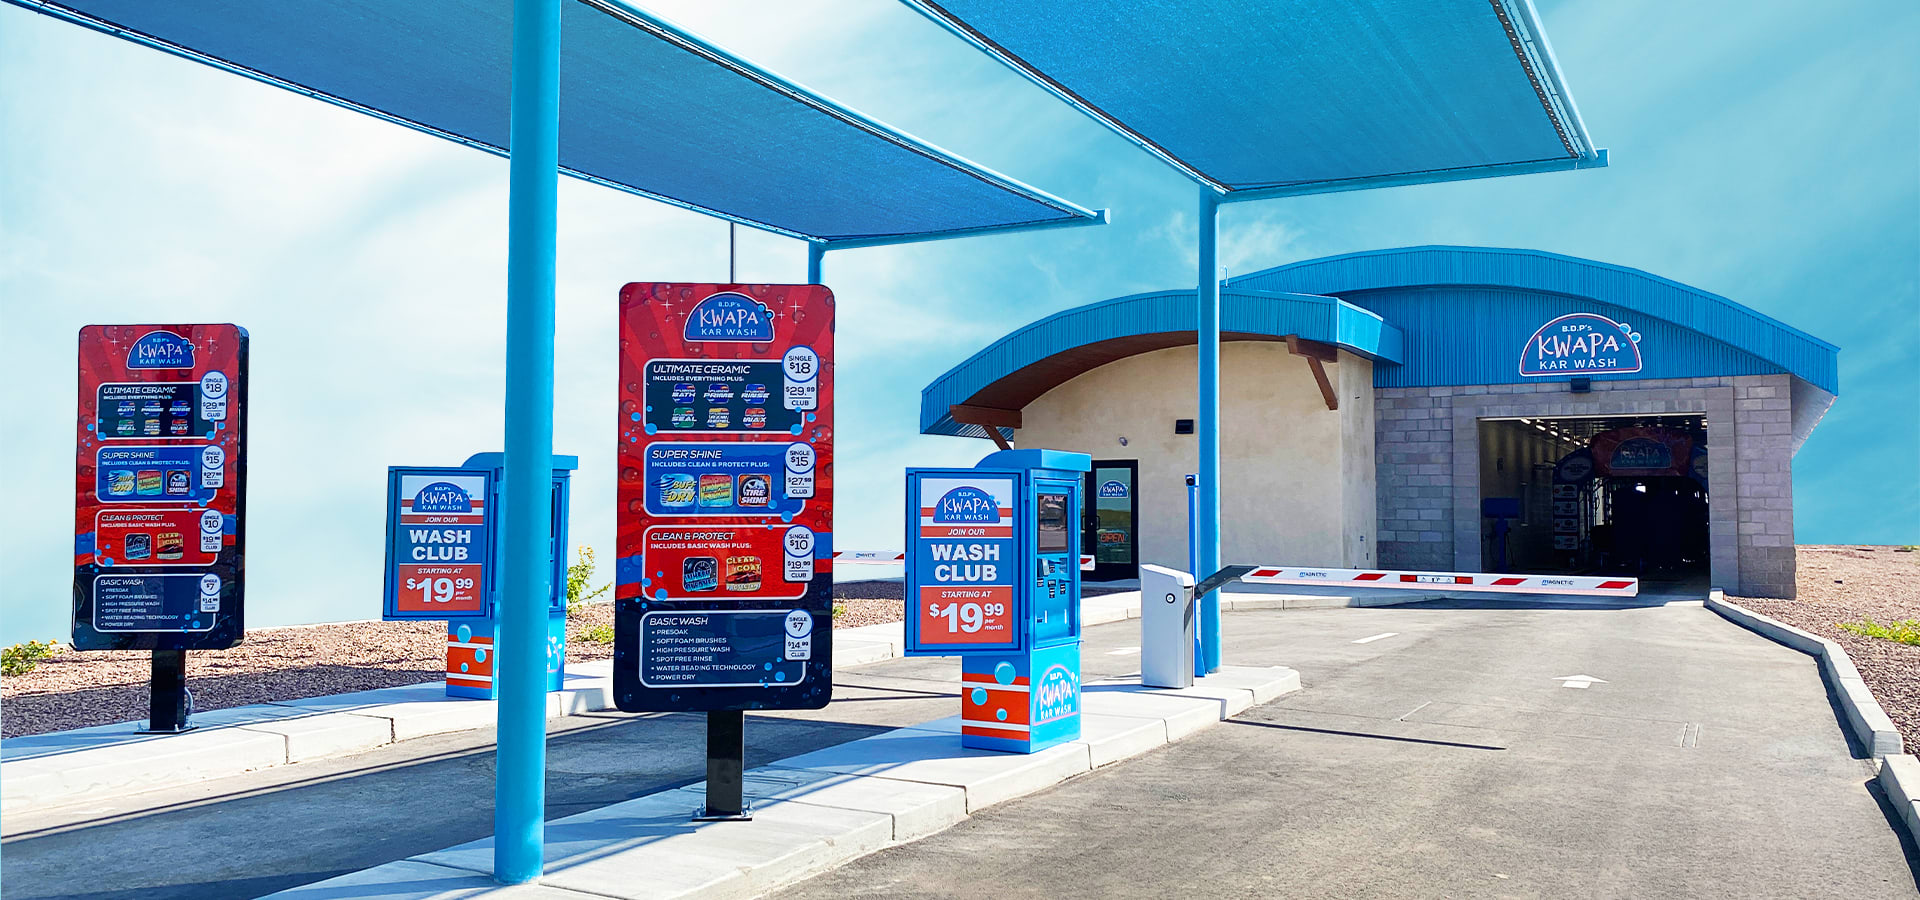 Entrance to the automated B.D.P's KWAPA carwash in Somerton AZ